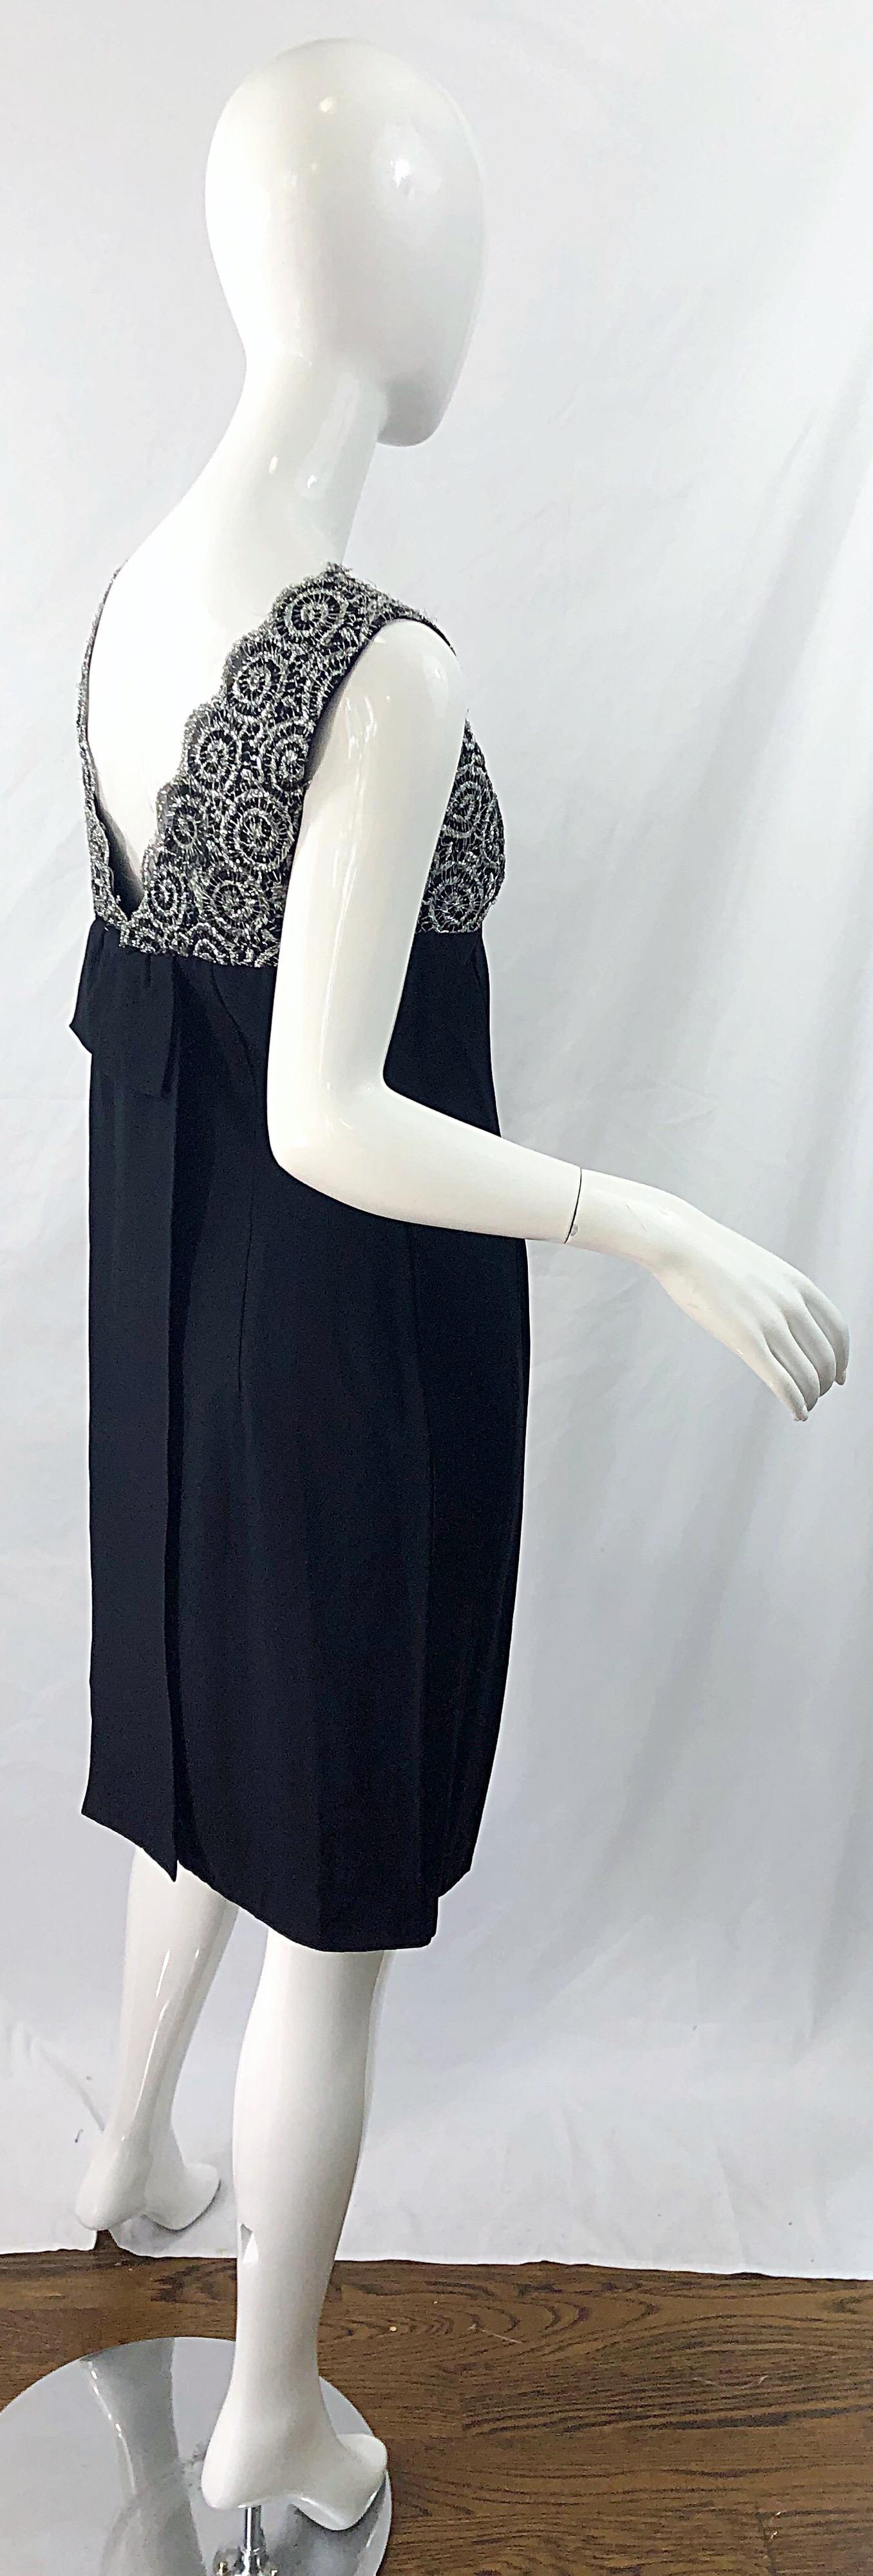 Chic 1960s Black and Silver Metallic Lace Rayon Crepe Vintage 60s Sheath Dress For Sale 6